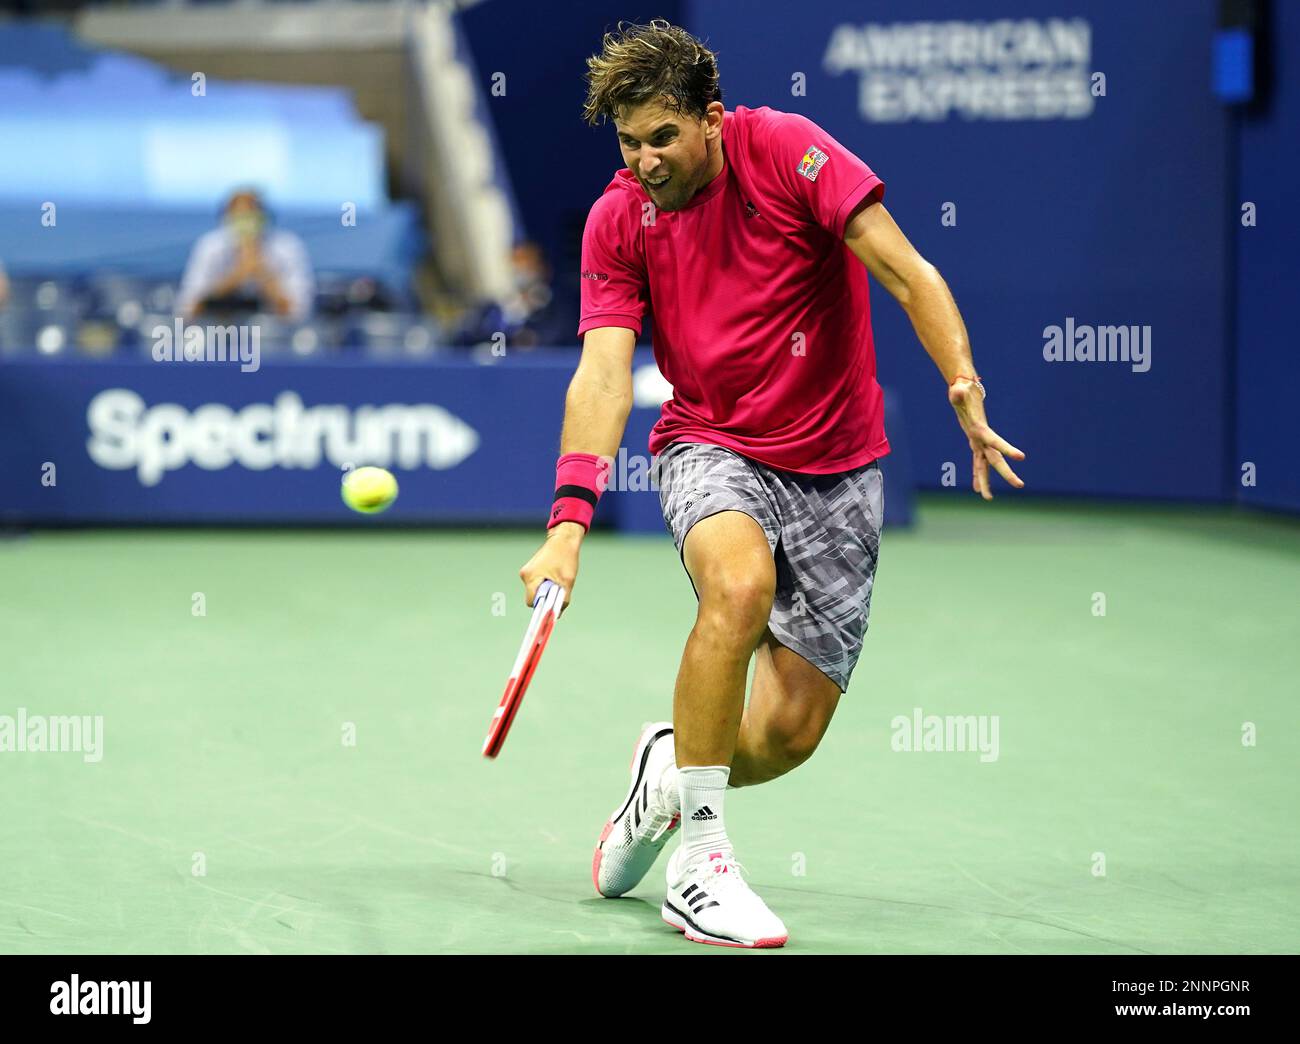 Dominic Thiem in action against Marin Cilic during a mens singles match at the 2020 US Open, Saturday, Sept